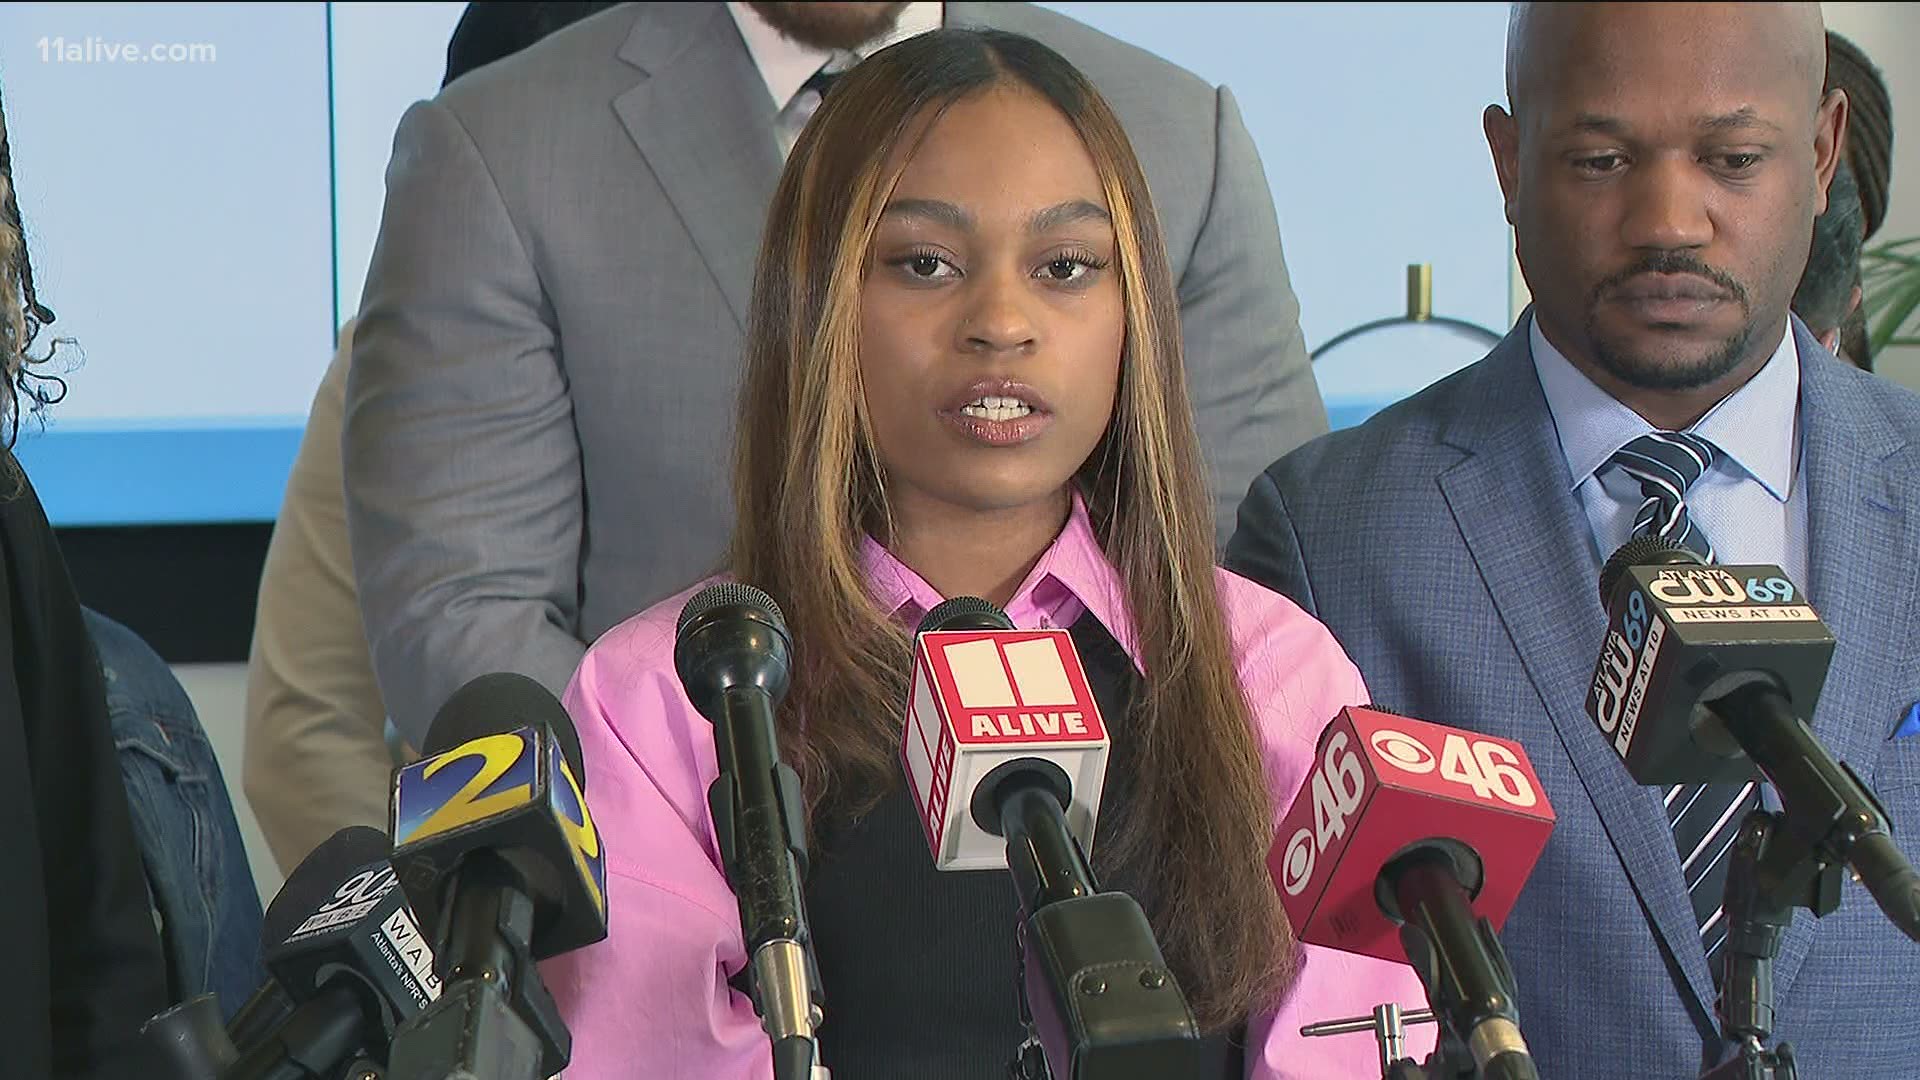 Taniyah Pilgrim and Messiah Young described  the lingering trauma inflicted on the two young college students when they were dragged out of a car and tased.